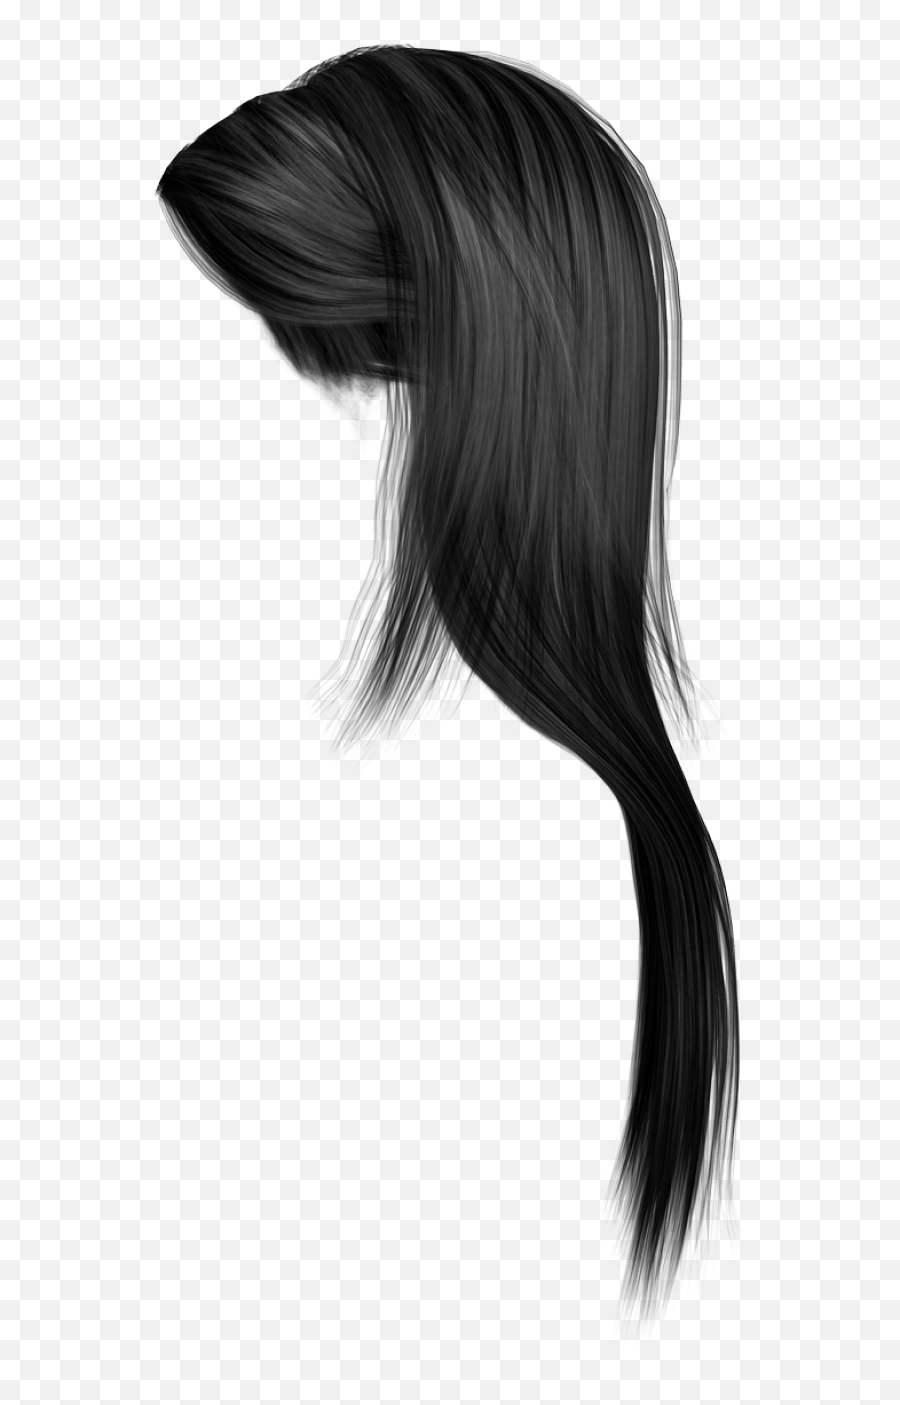 Download Hair Png Transparent Image For - Png Girl Hair Style,Hair Png Transparent